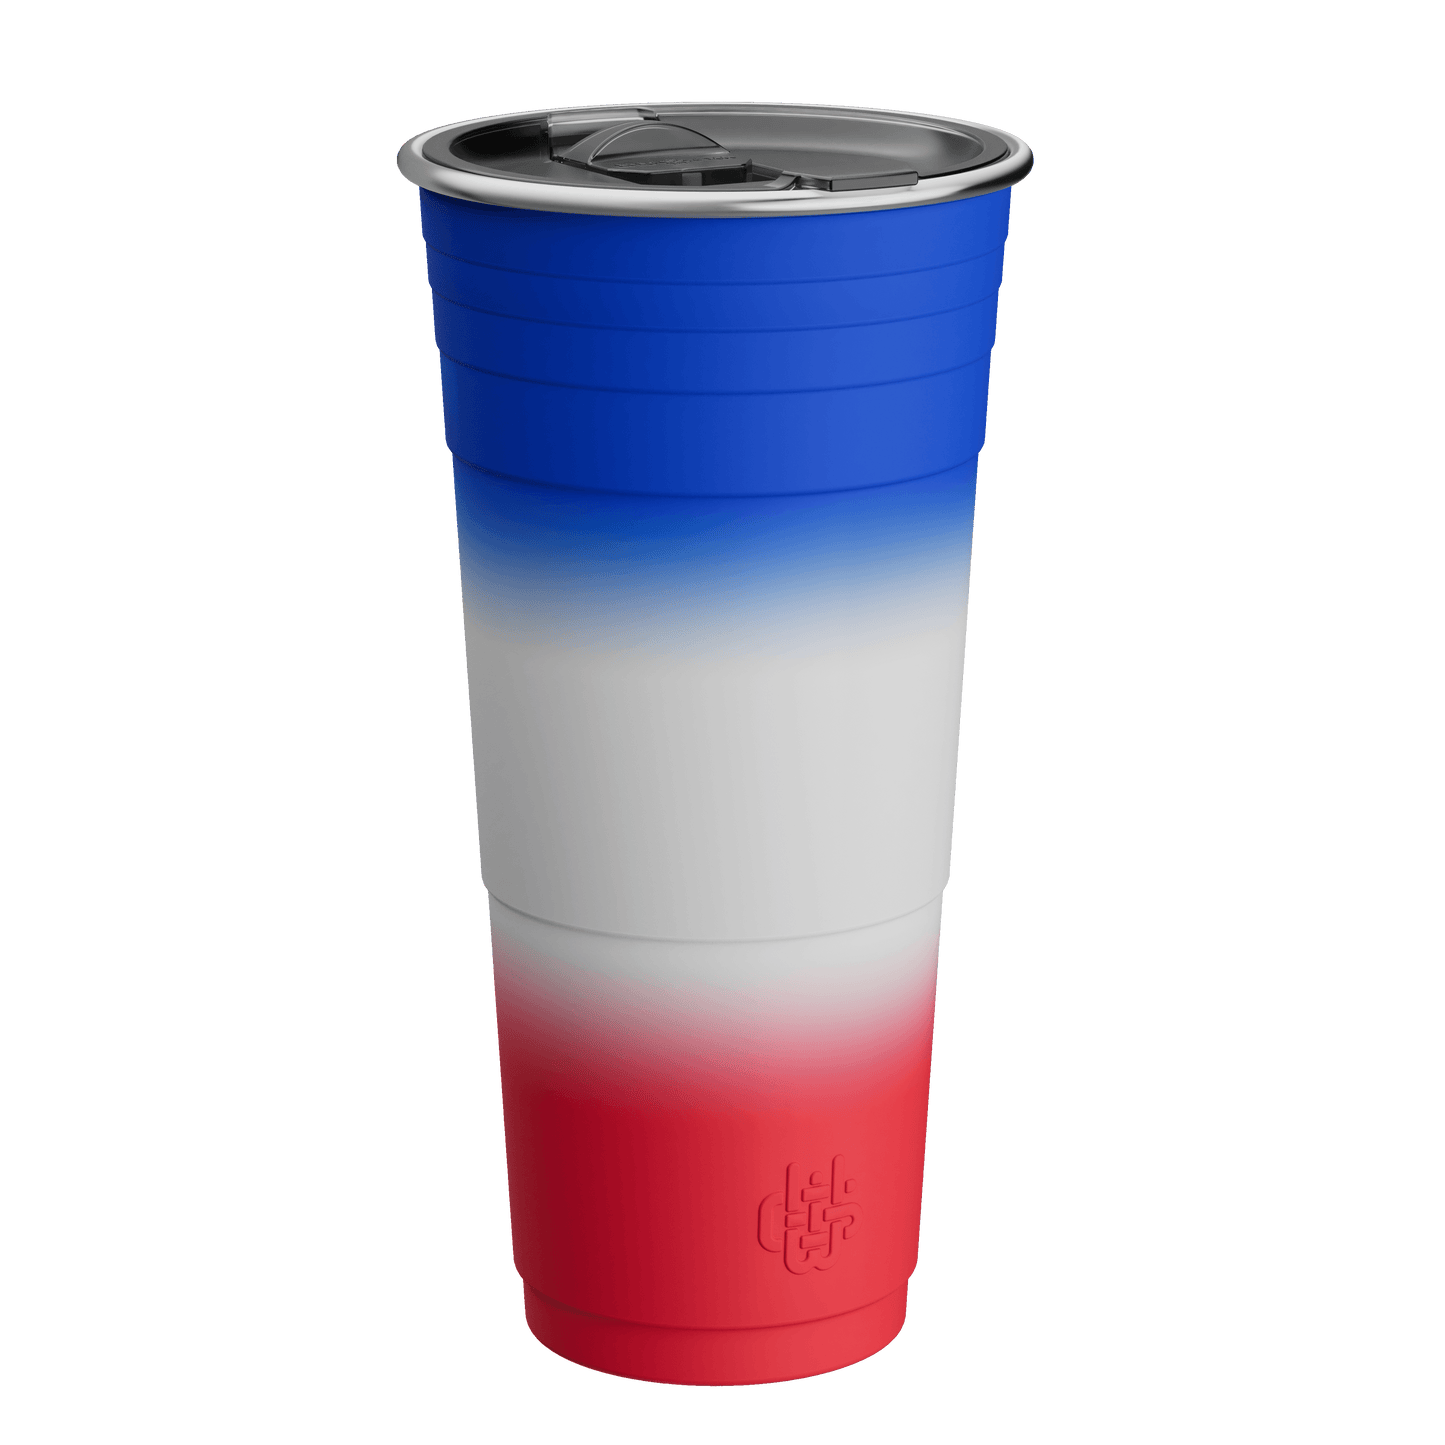 Wyld Gear 32oz Stainless Steel Cup - Multiple Colors - Perfect Etch